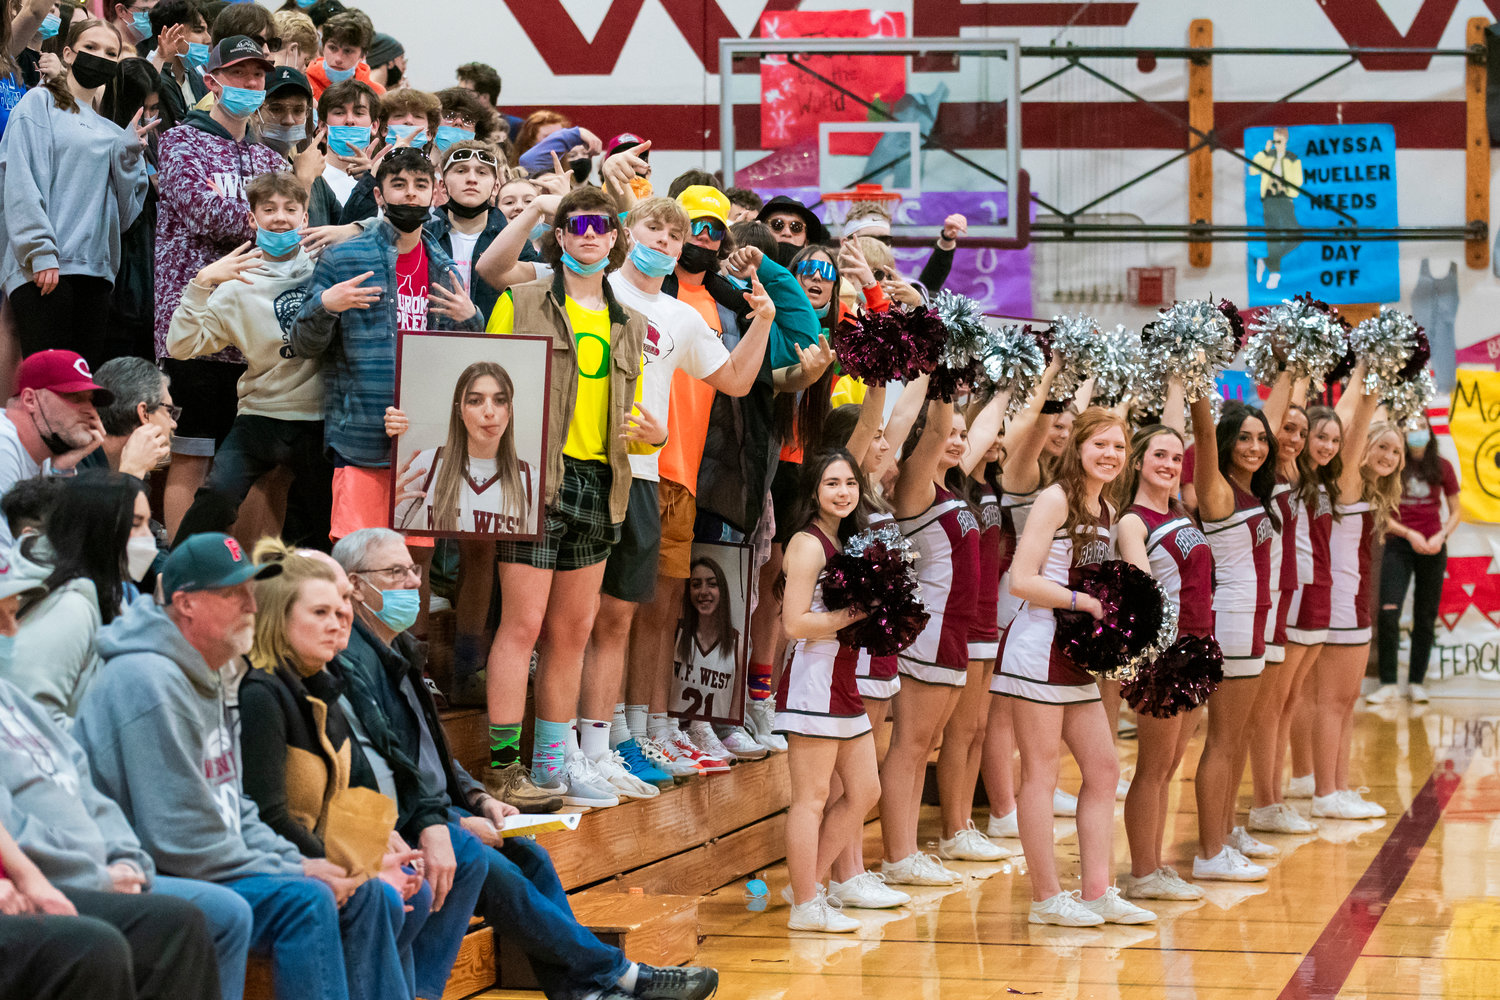 Bearcat fans and cheerleaders pose for photo as they lead the Tigers during a game at W.F. West High School in Chehalis Tuesday, February 1, 2022.